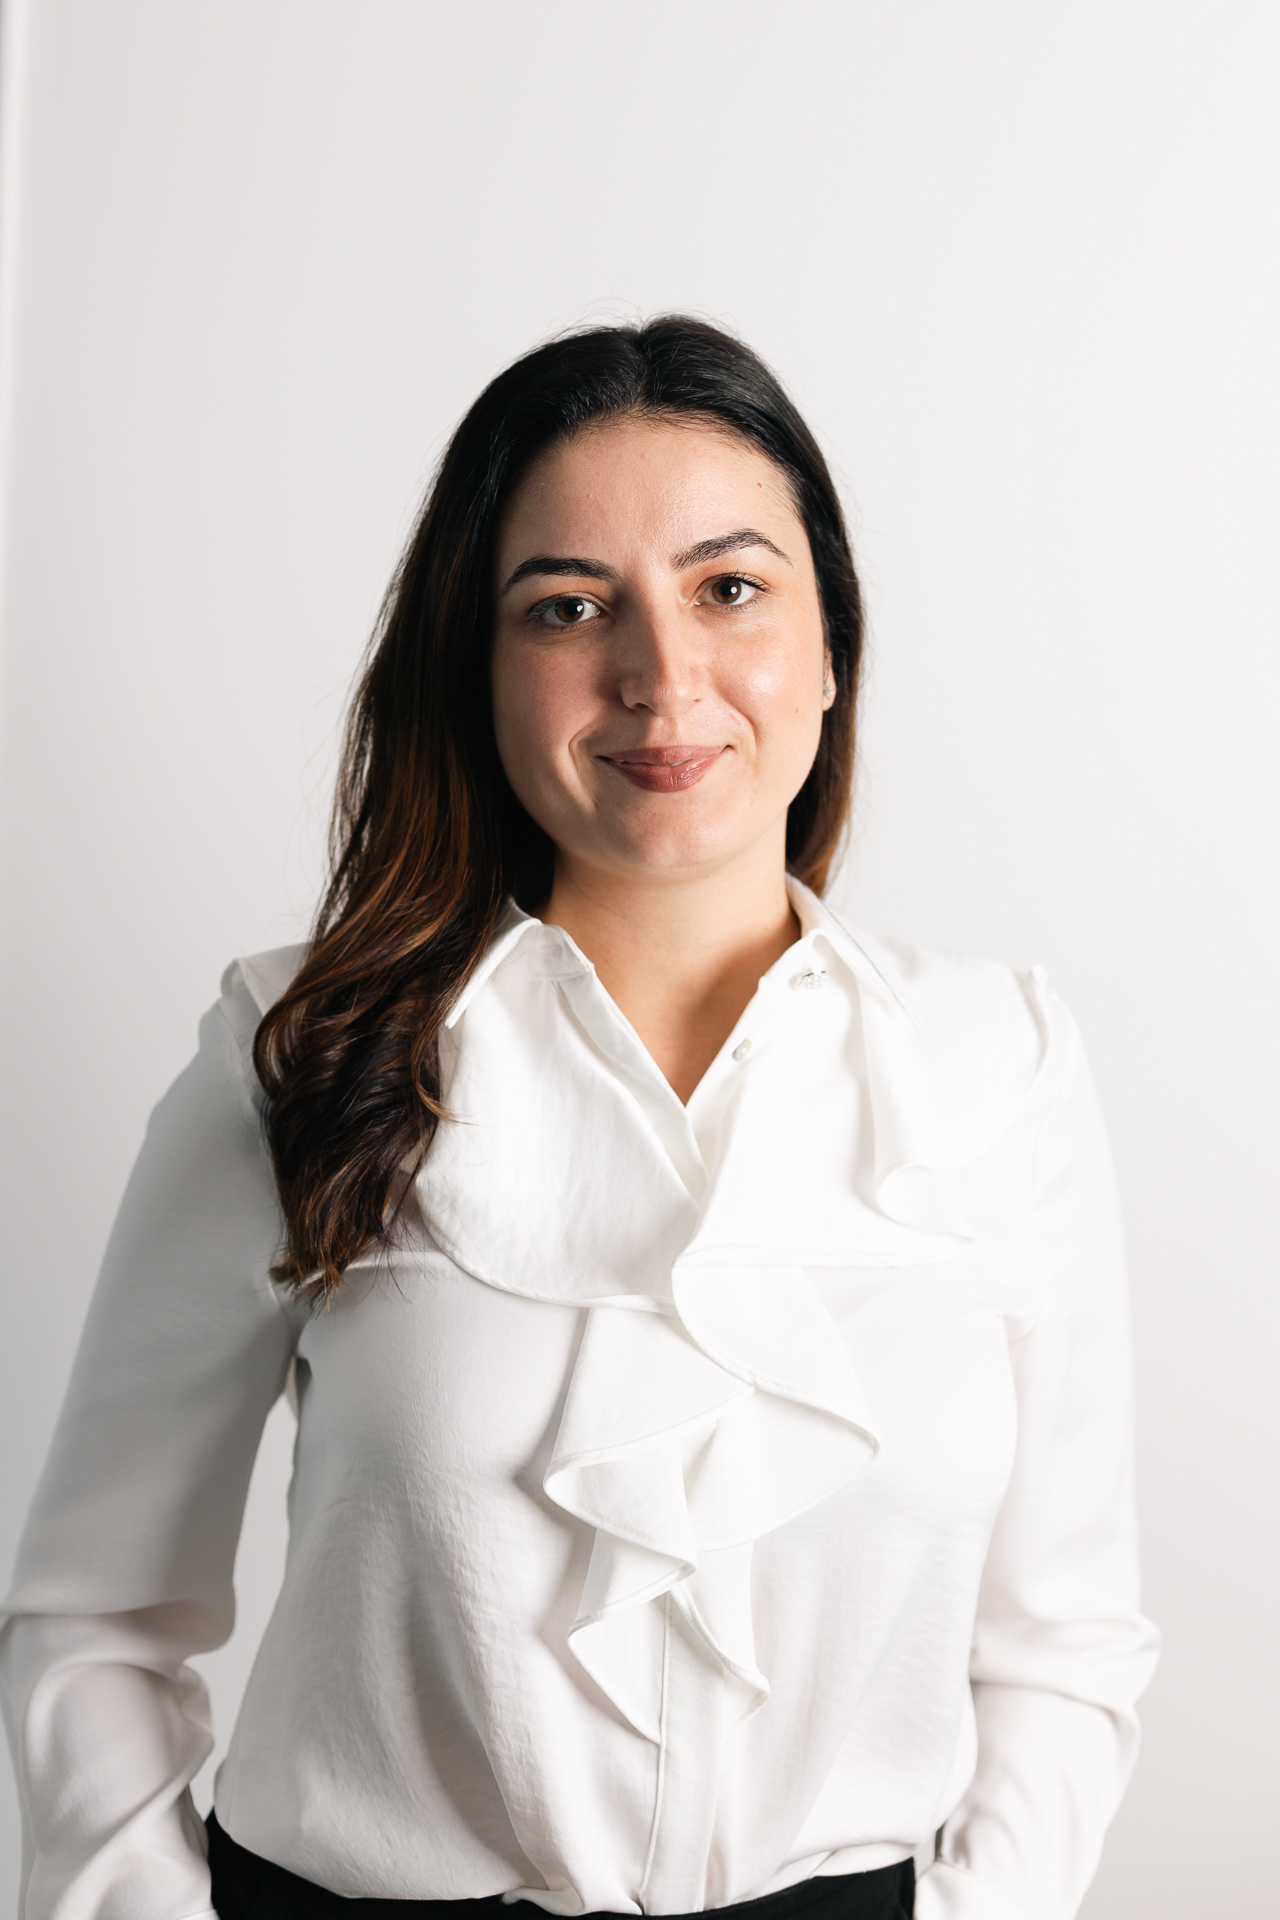 Vision One Appoints Anabella Cassinelli as a Senior Market Research Executive